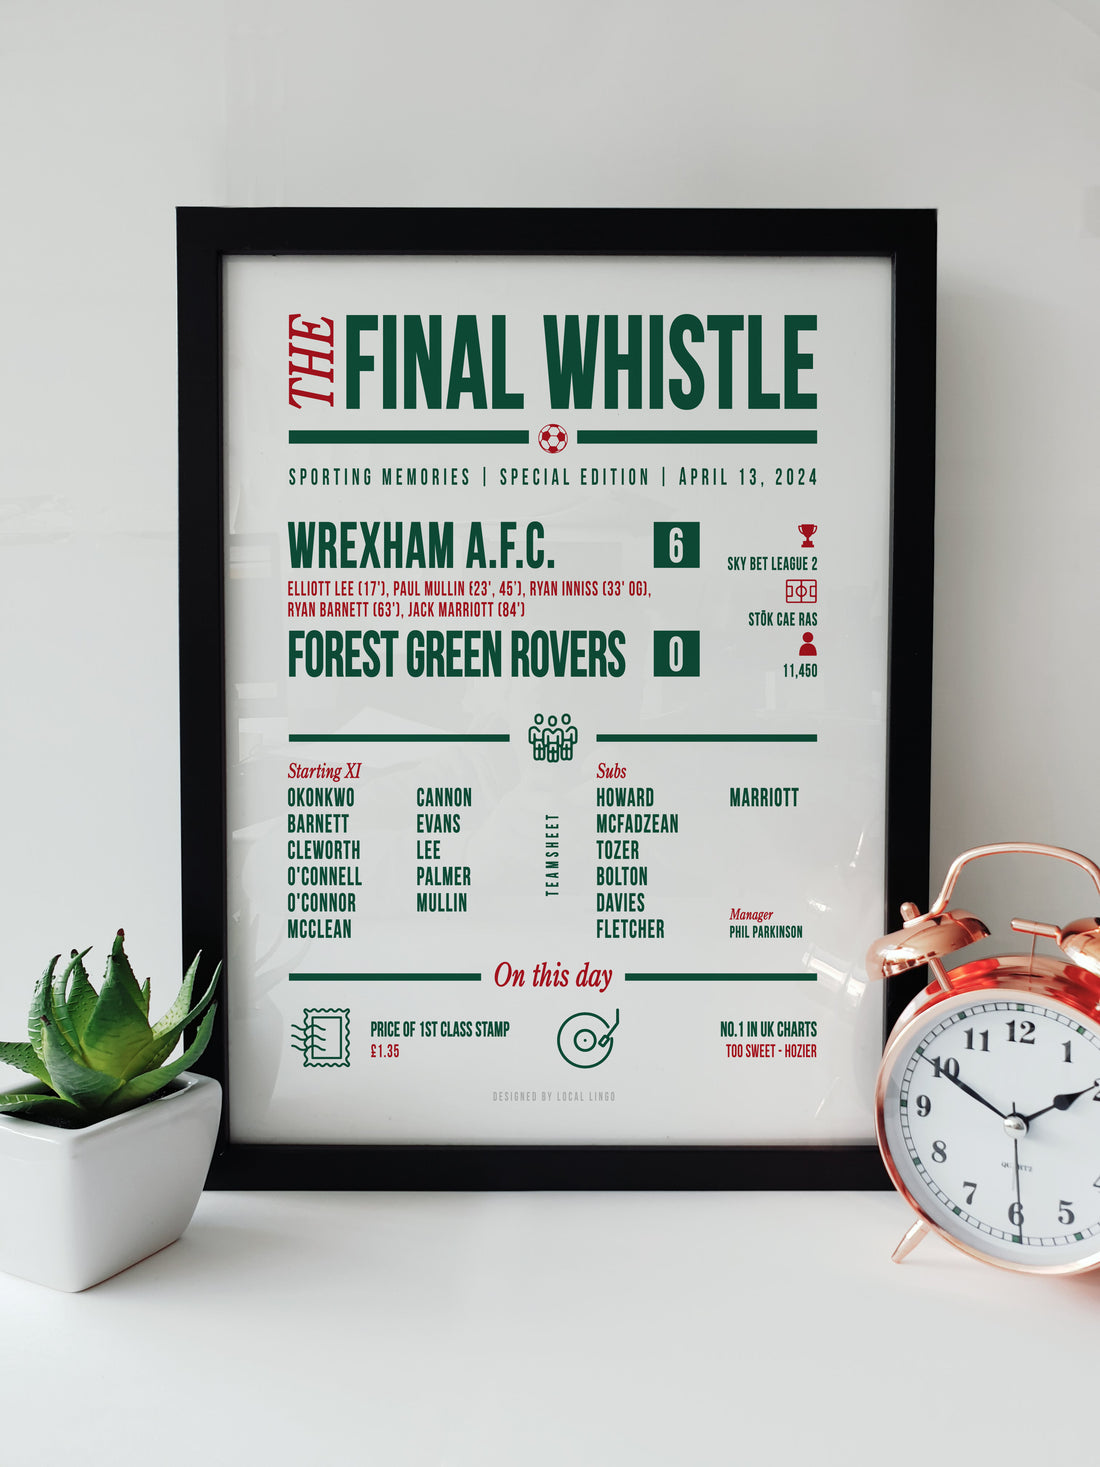 Commemorative Wrexham AFC victory print in a newspaper style, highlighting the historic 6-0 win and back-to-back promotions from Local Lingo.